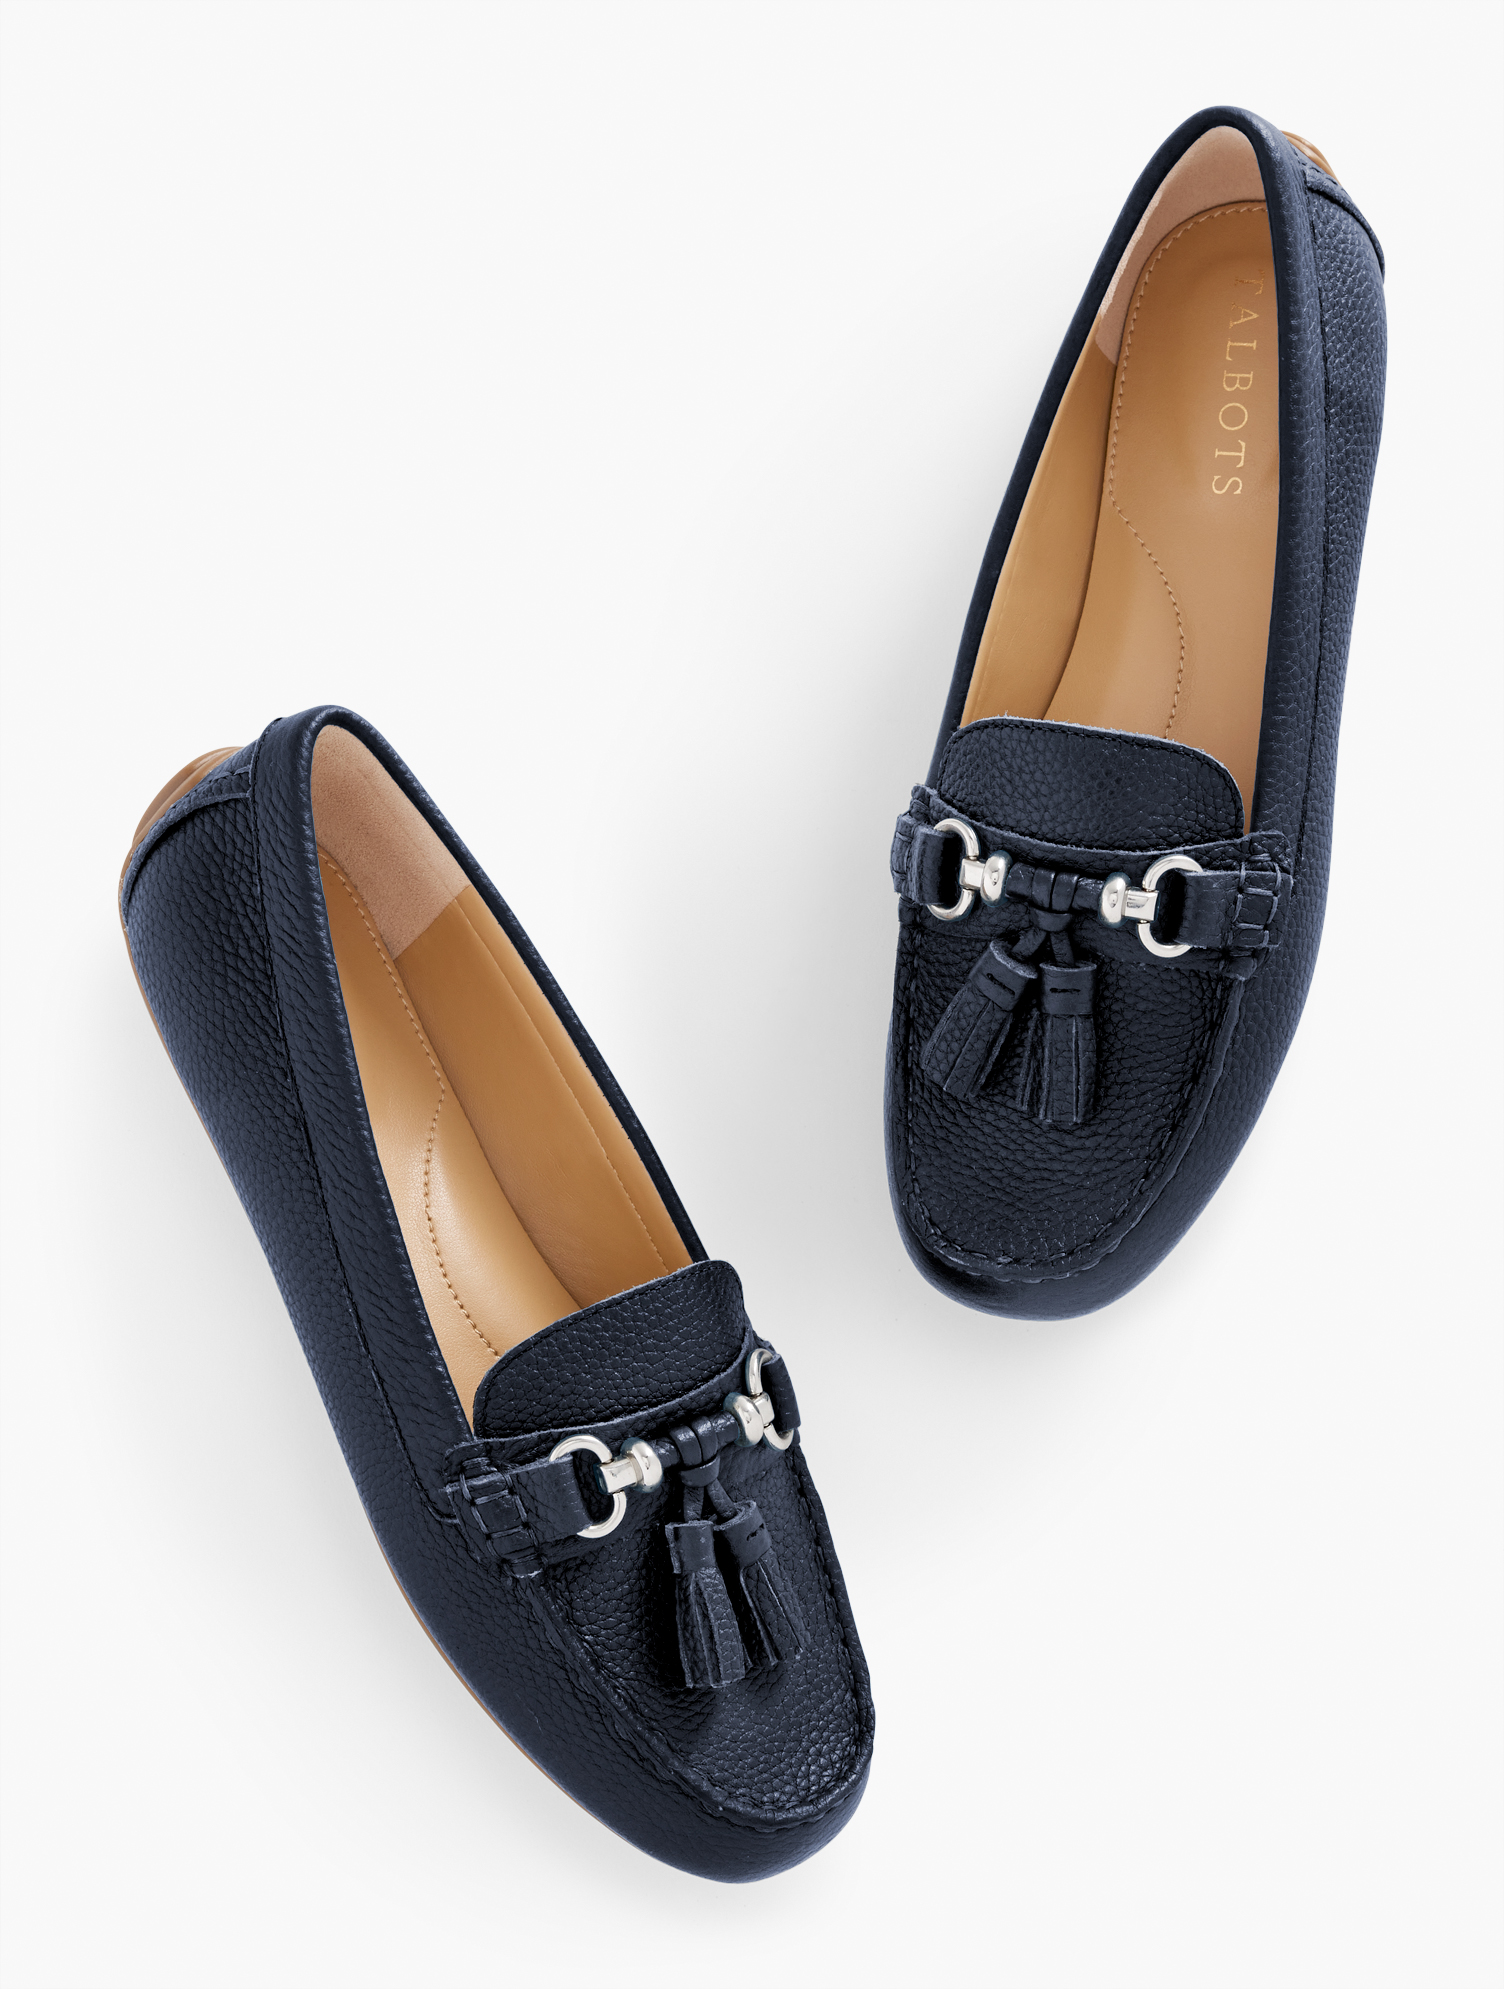 Talbots Everson Tassel Driving Moccasins Shoes - Leather - Blue - 10m